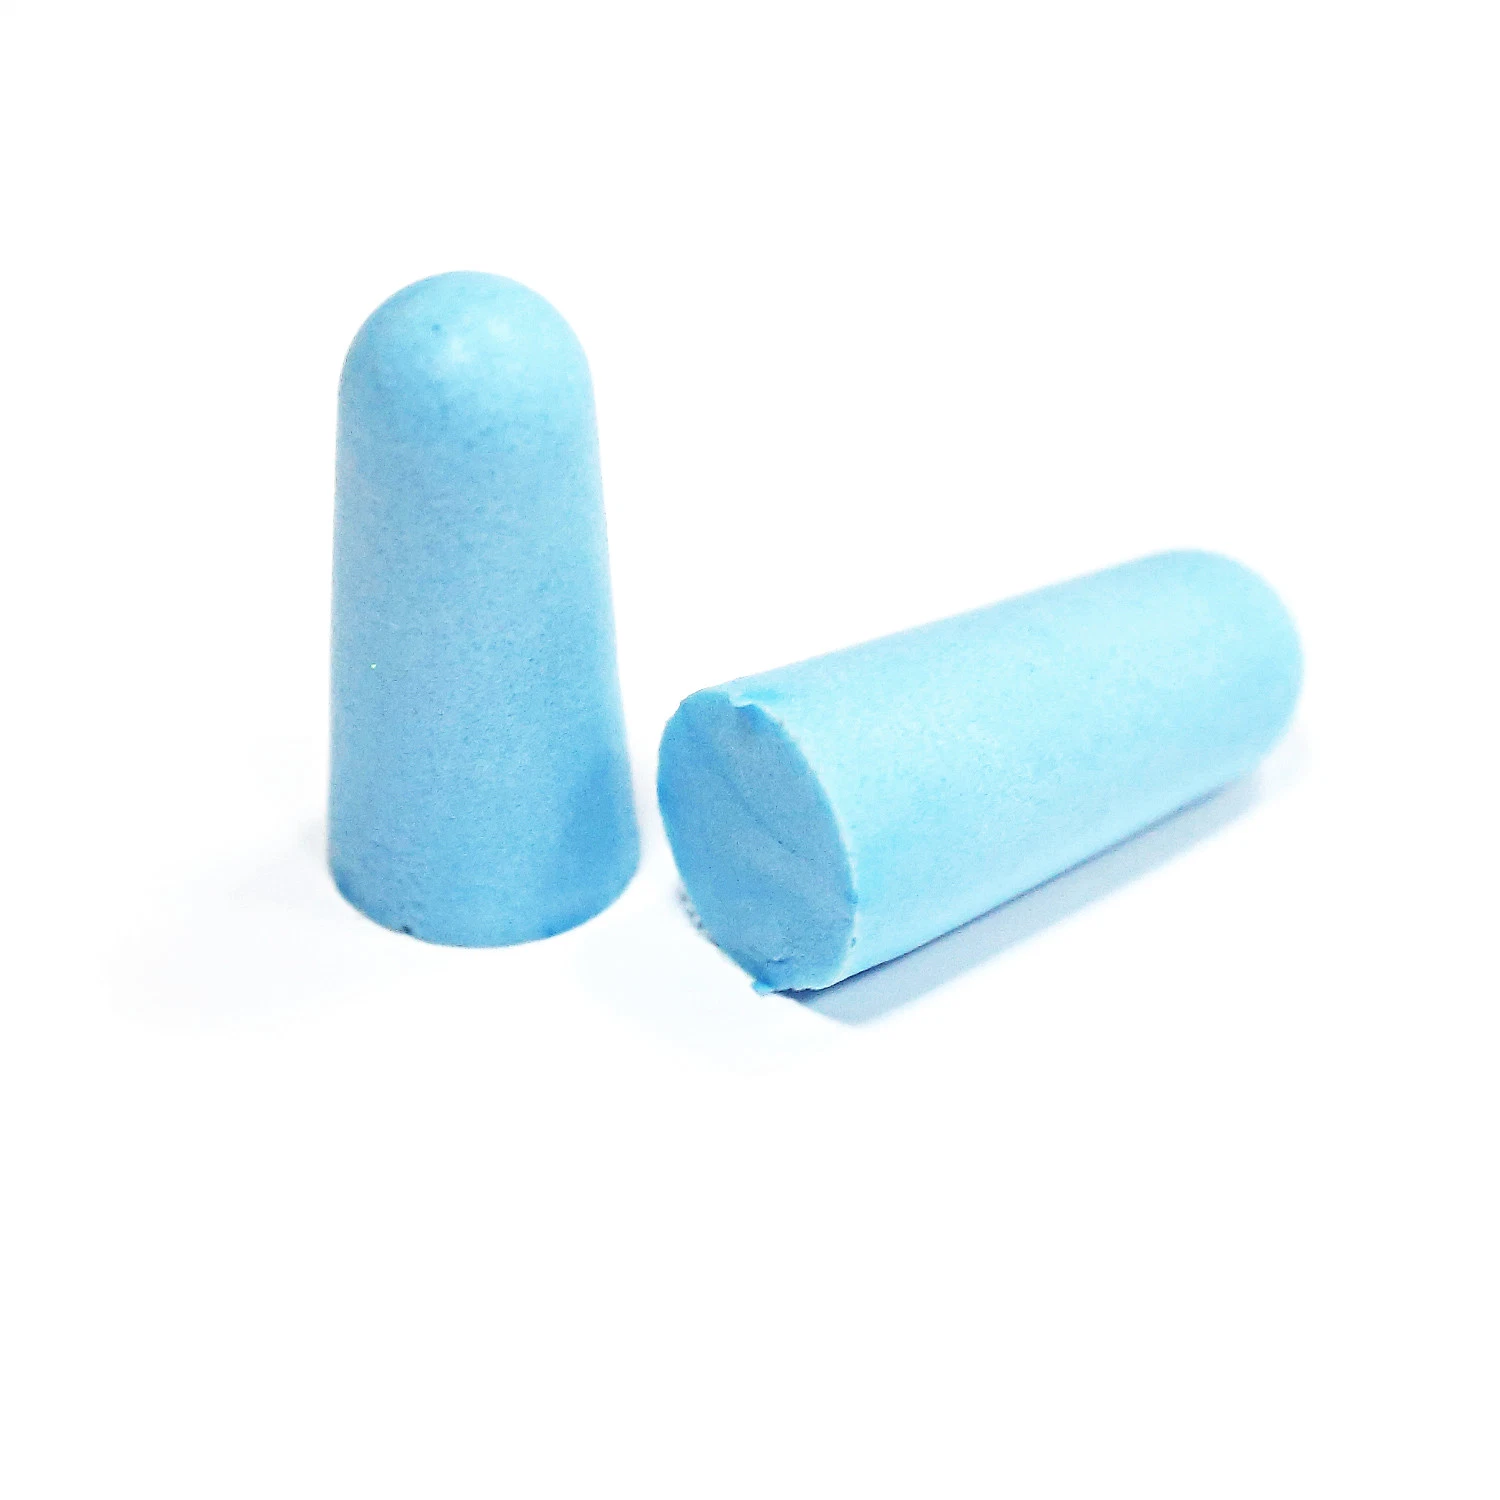 Bullet Shape PU Foam Yellow Earplug Without Nylon or Plastic Cord 34dB Snr Many Colors Available